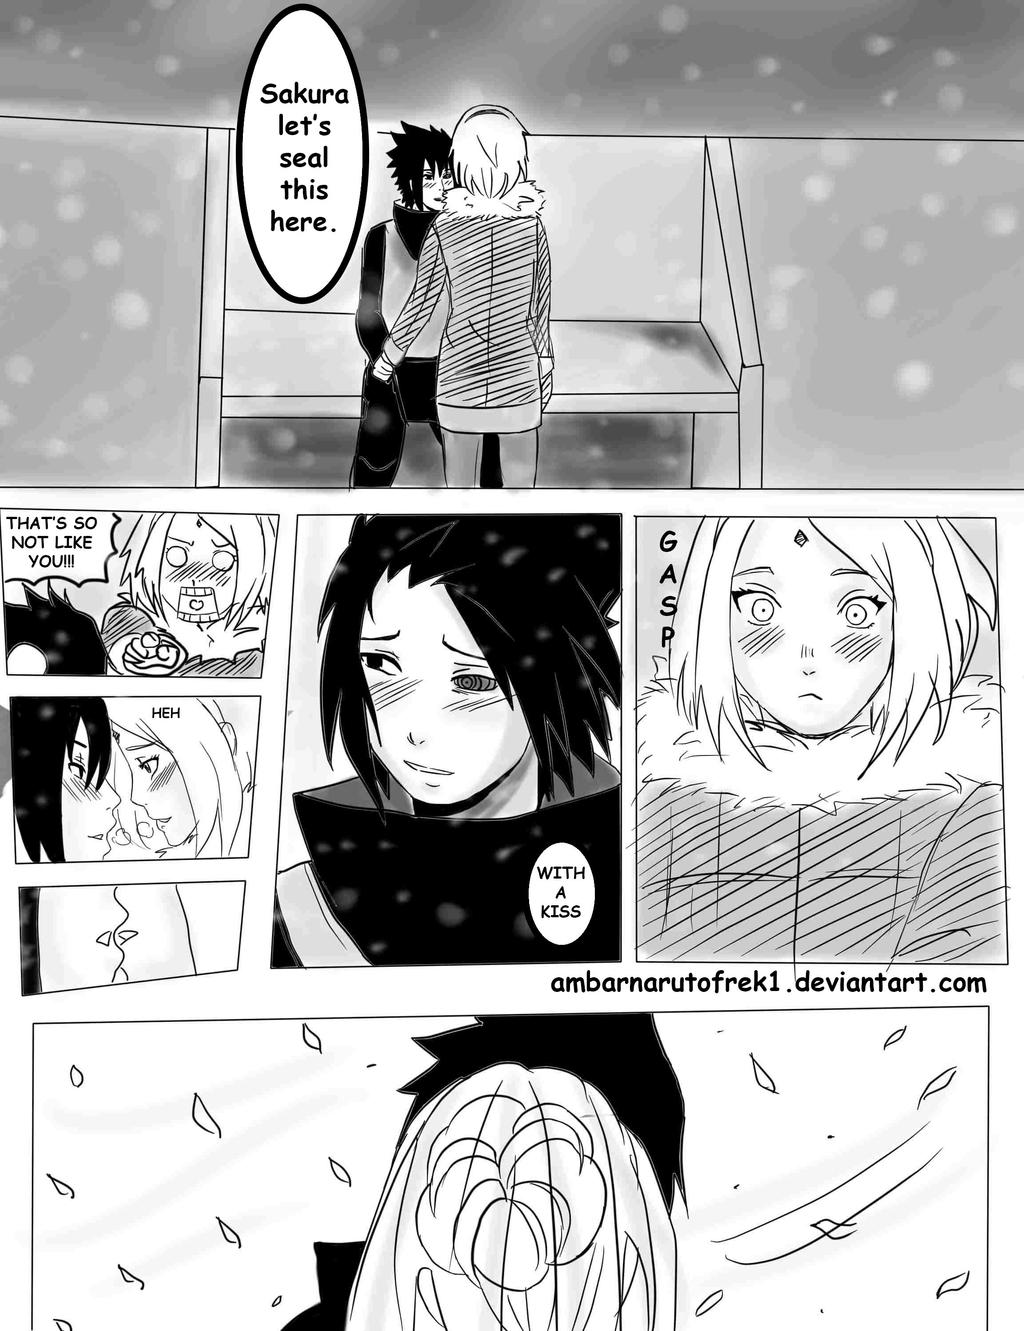 Your Smile [COMIC] - Chapter 4 - HyphenL - Naruto [Archive of Our Own]